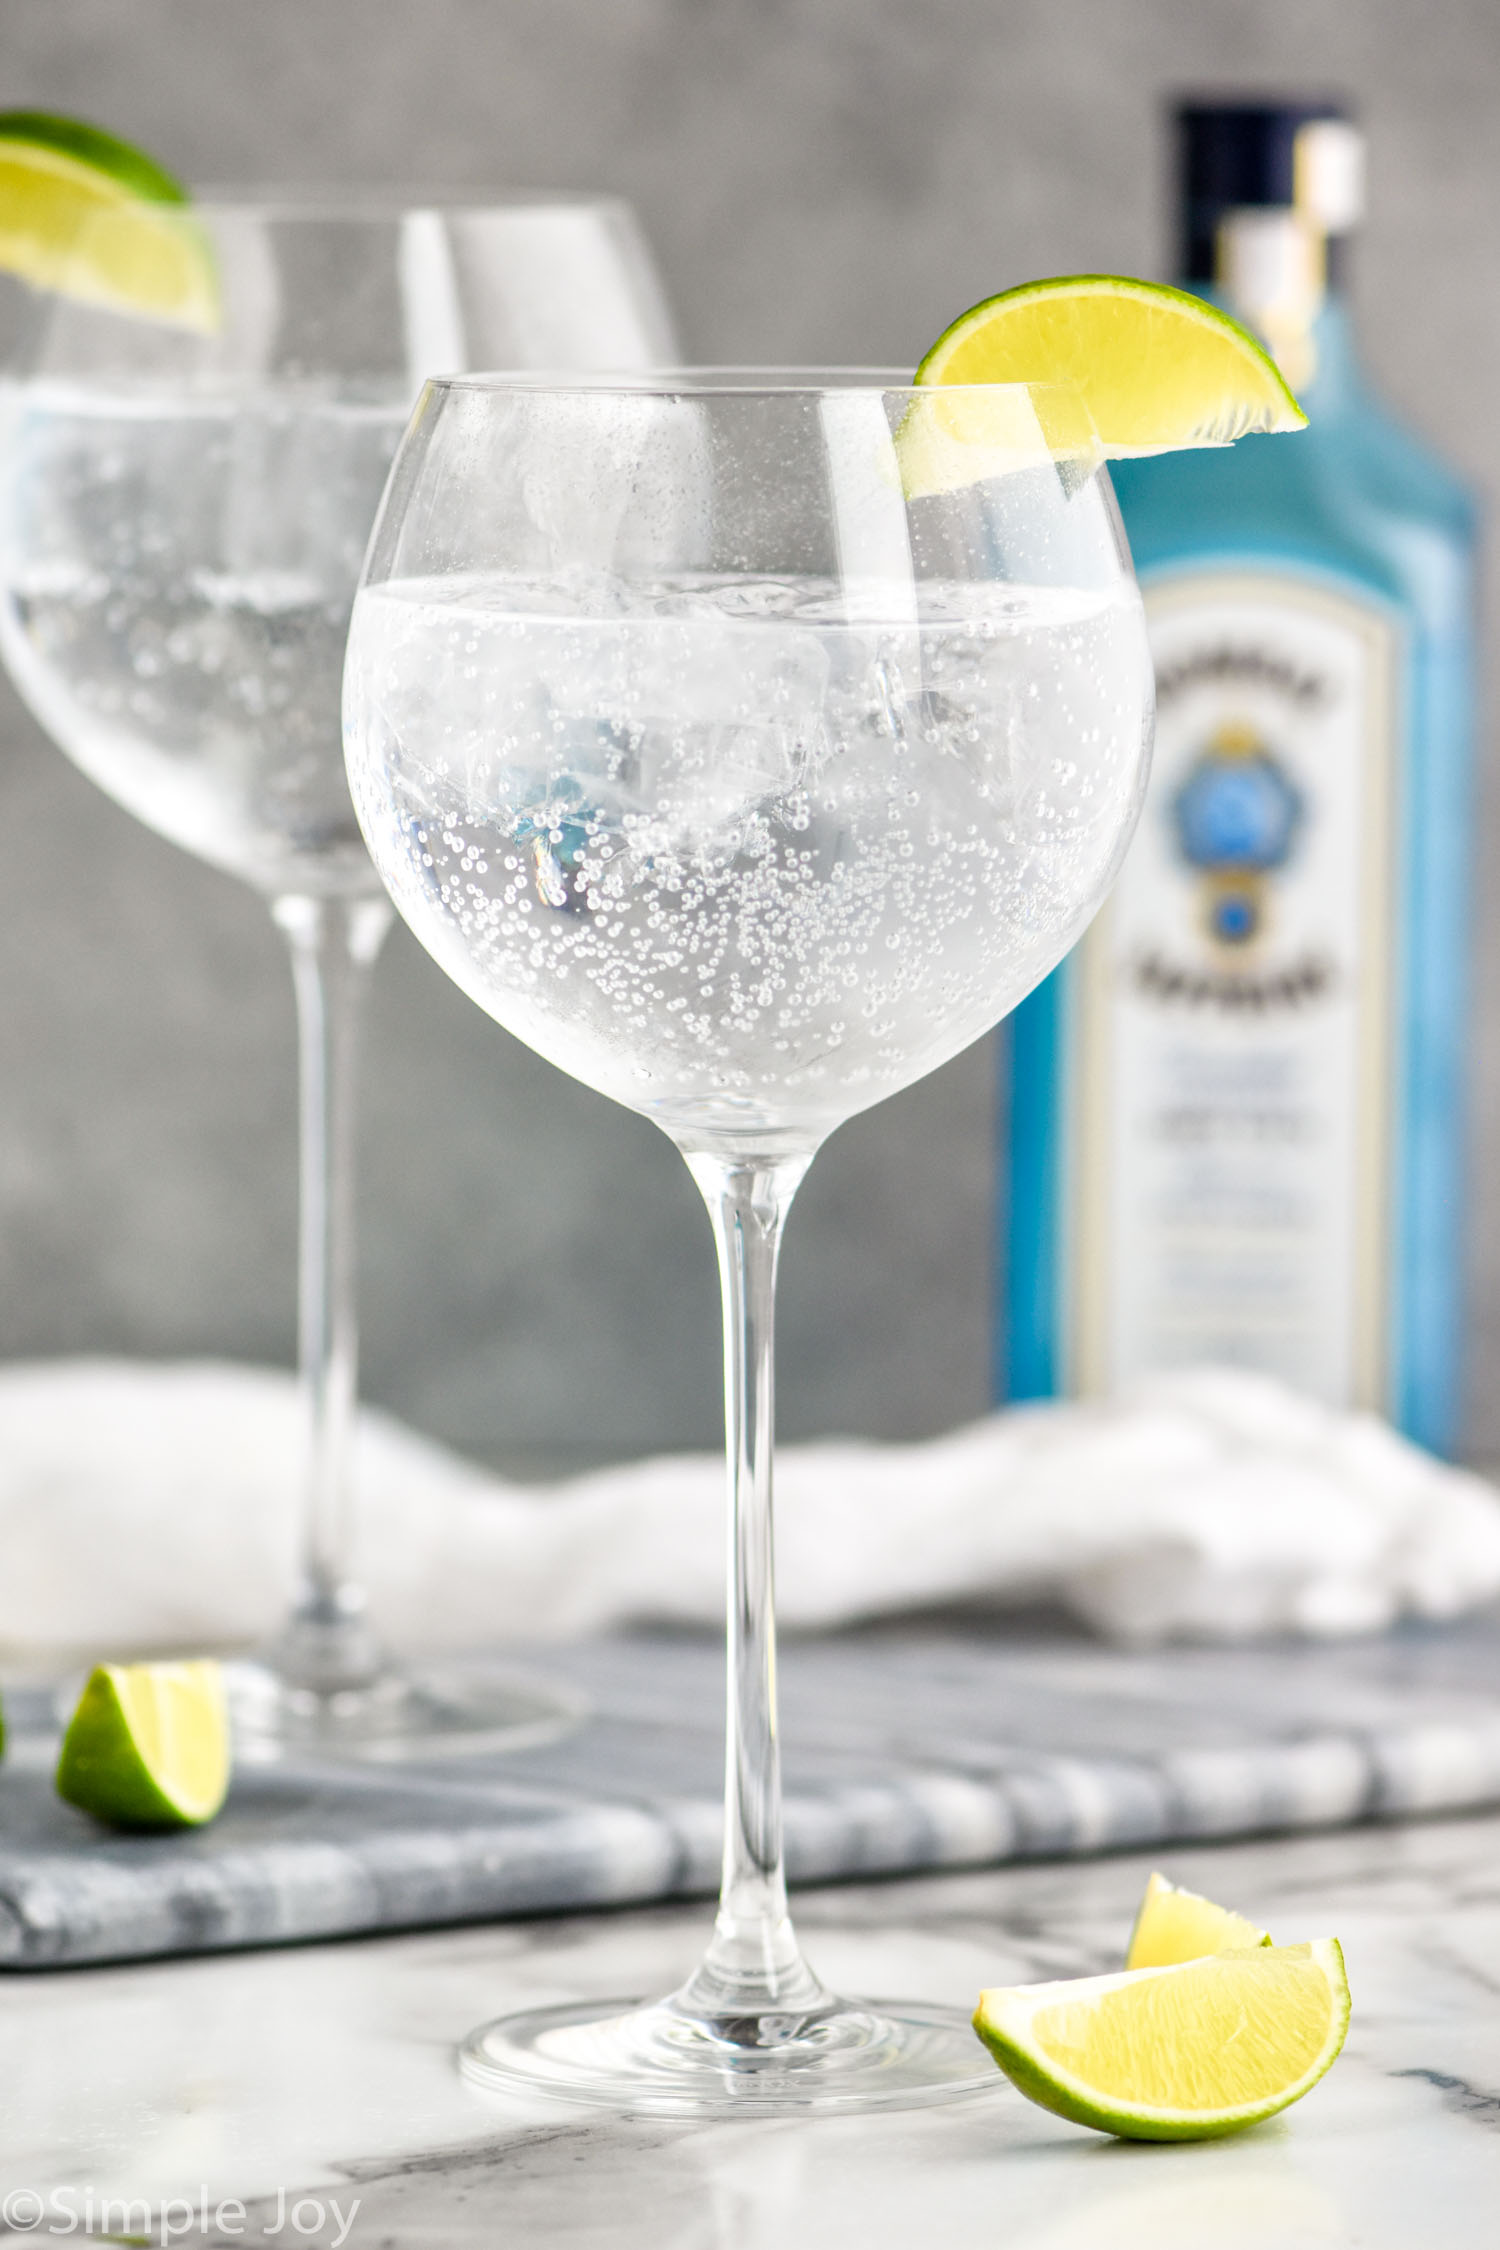 The History Of Gin And Tonic Discount Order, Save 49% | jlcatj.gob.mx